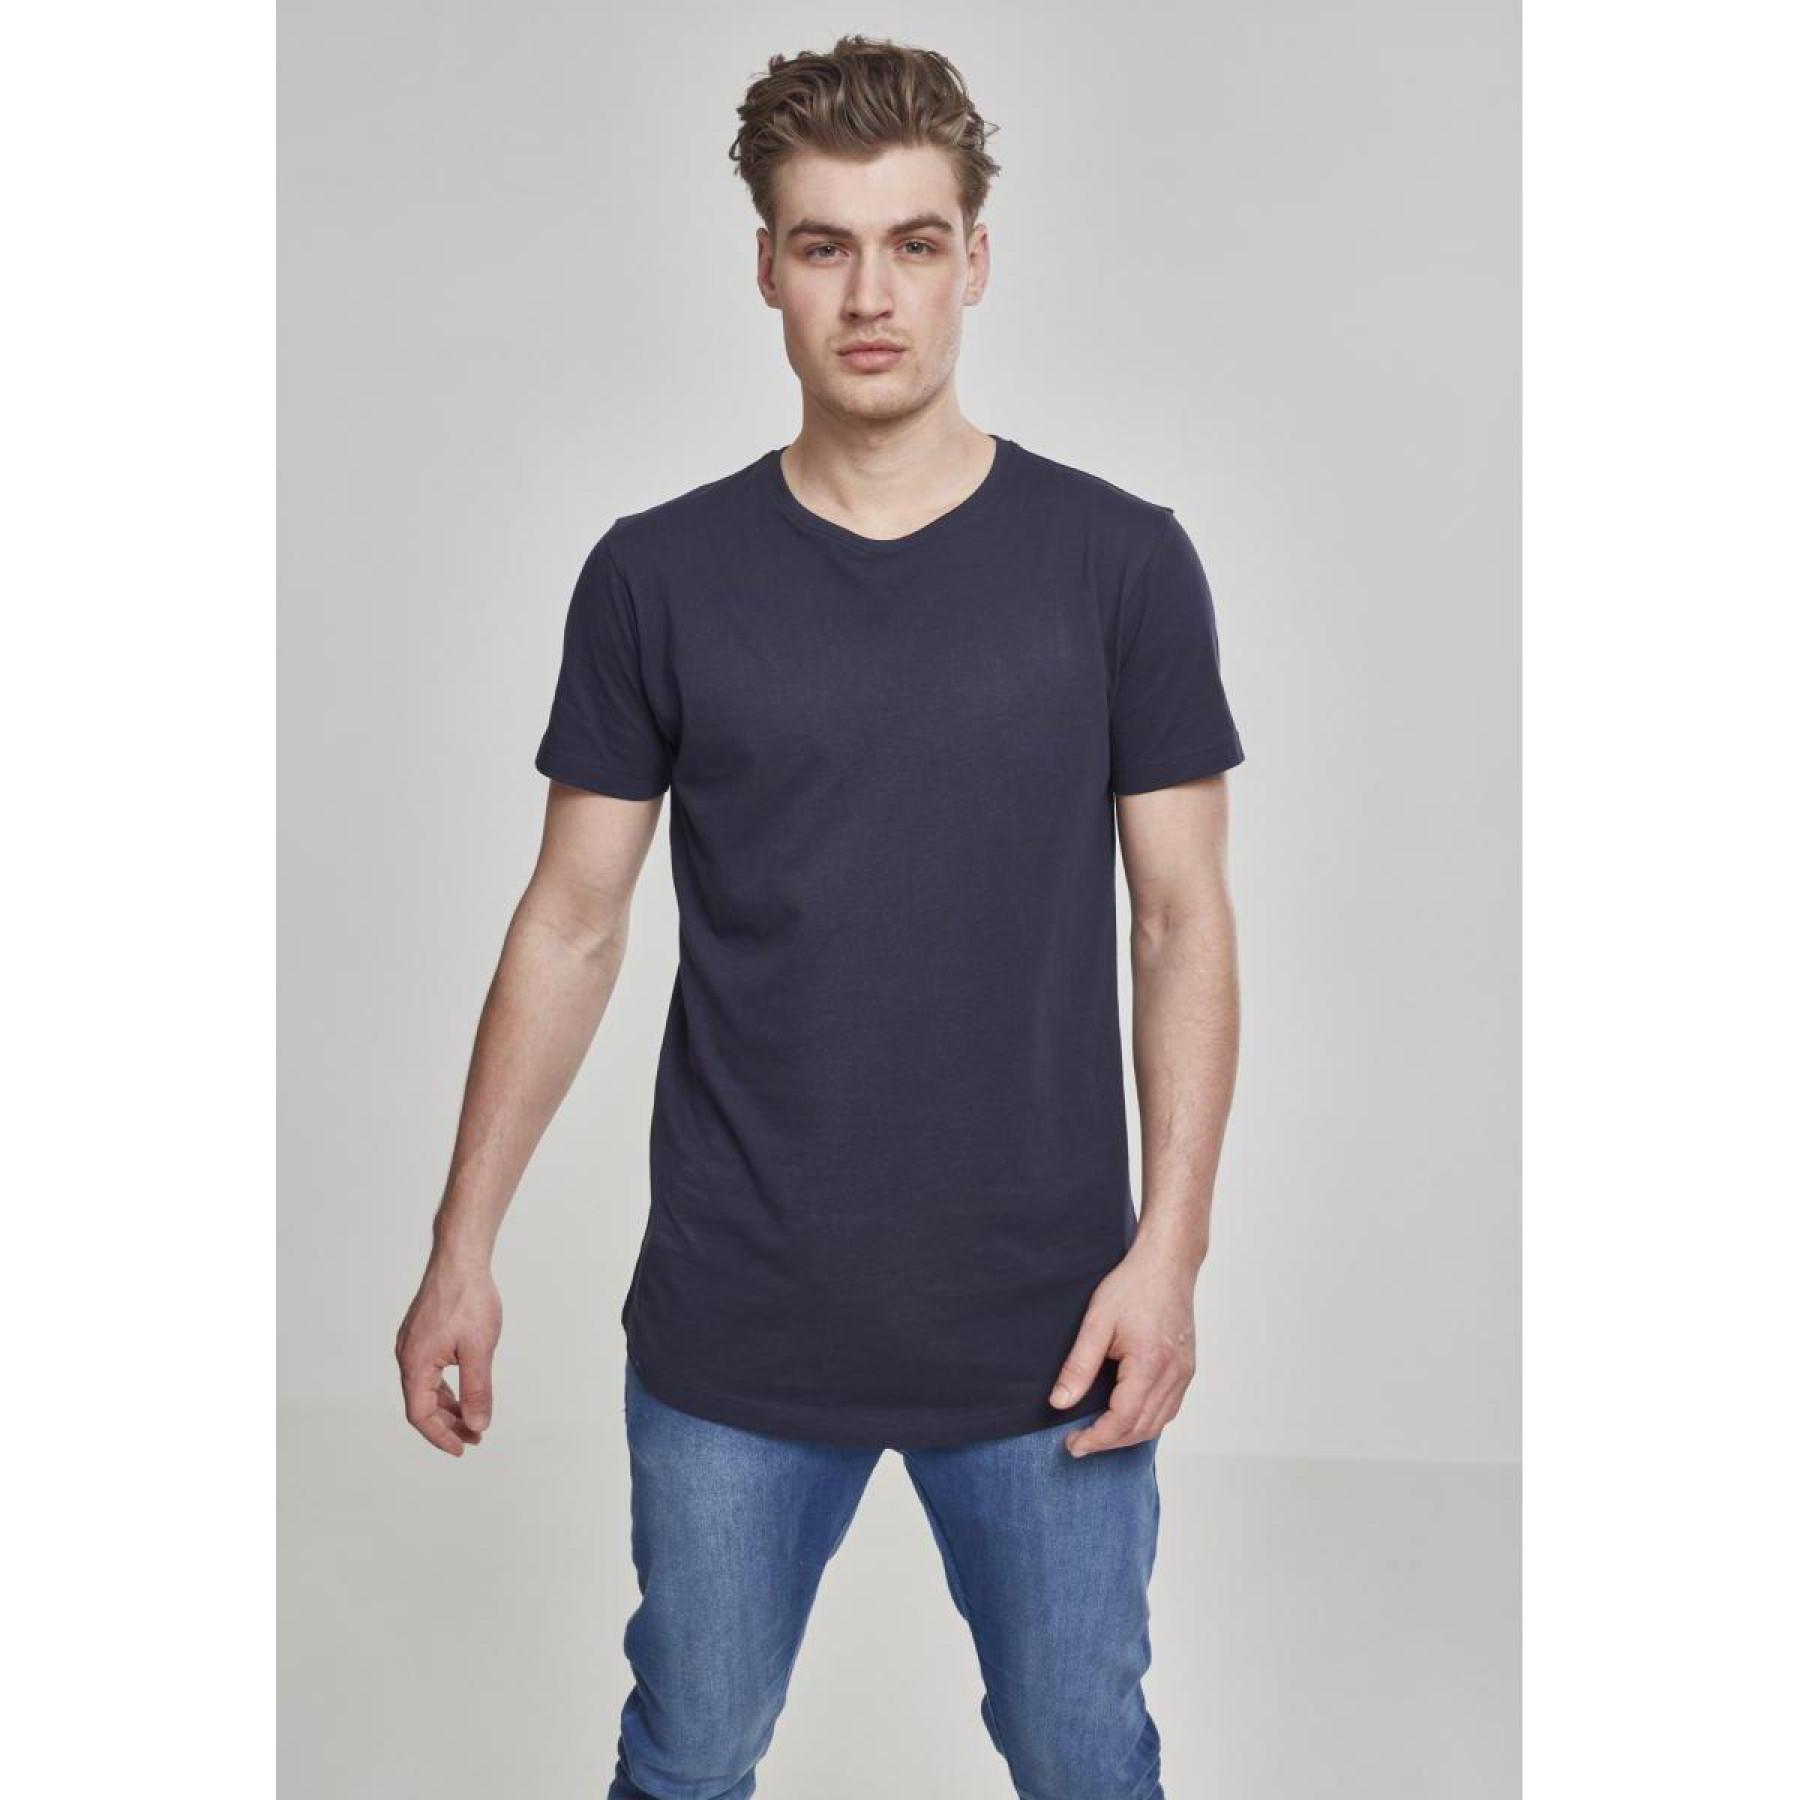 T-shirt grandes tailles Urban Classic shaped long